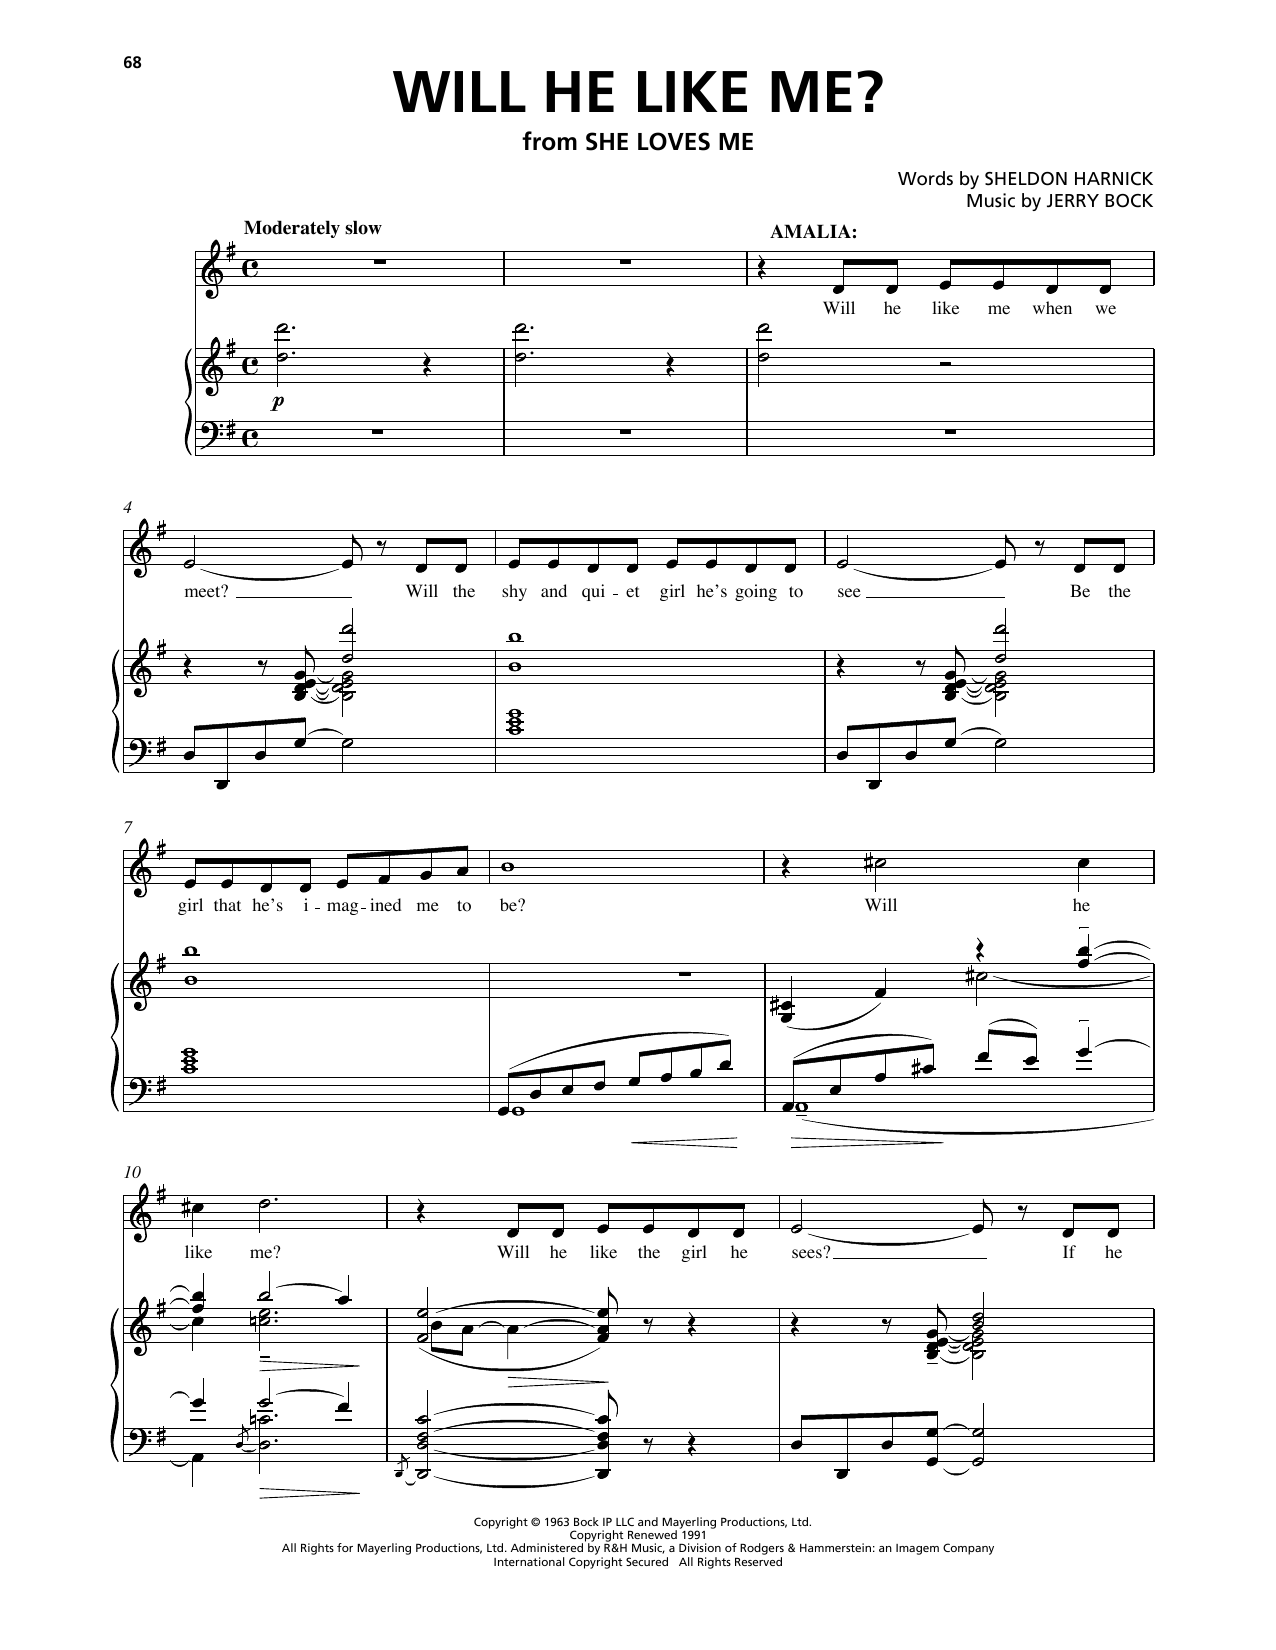 Download Bock & Harnick Will He Like Me? (from She Loves Me) Sheet Music